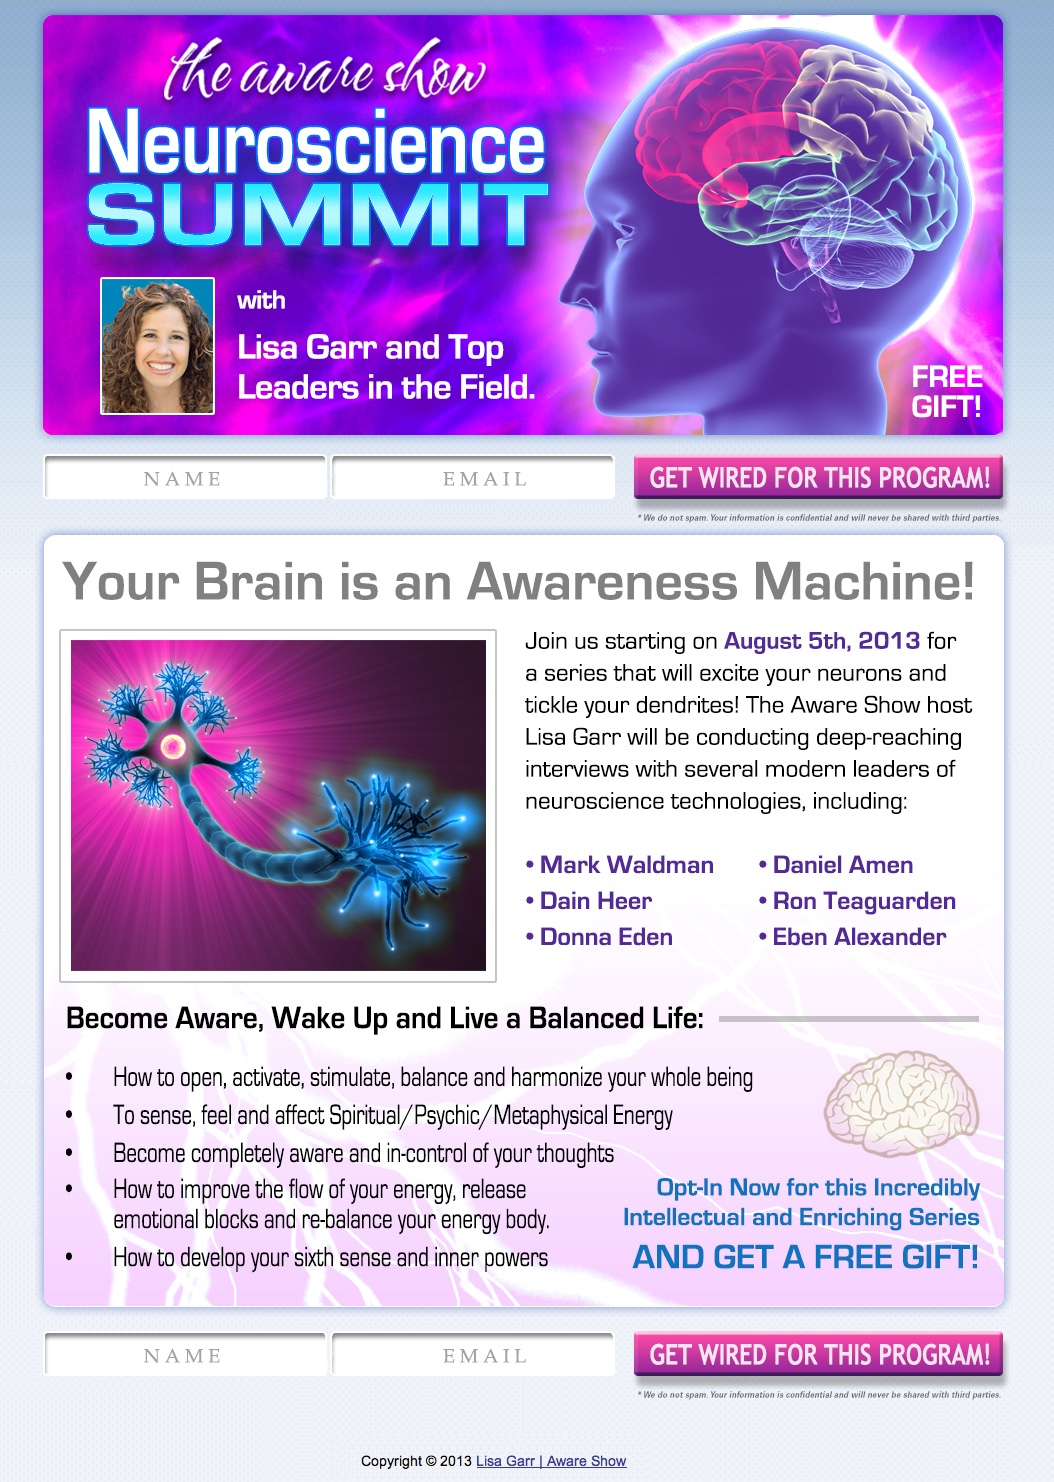 The Aware Show NeuroSummit I Squeeze Page